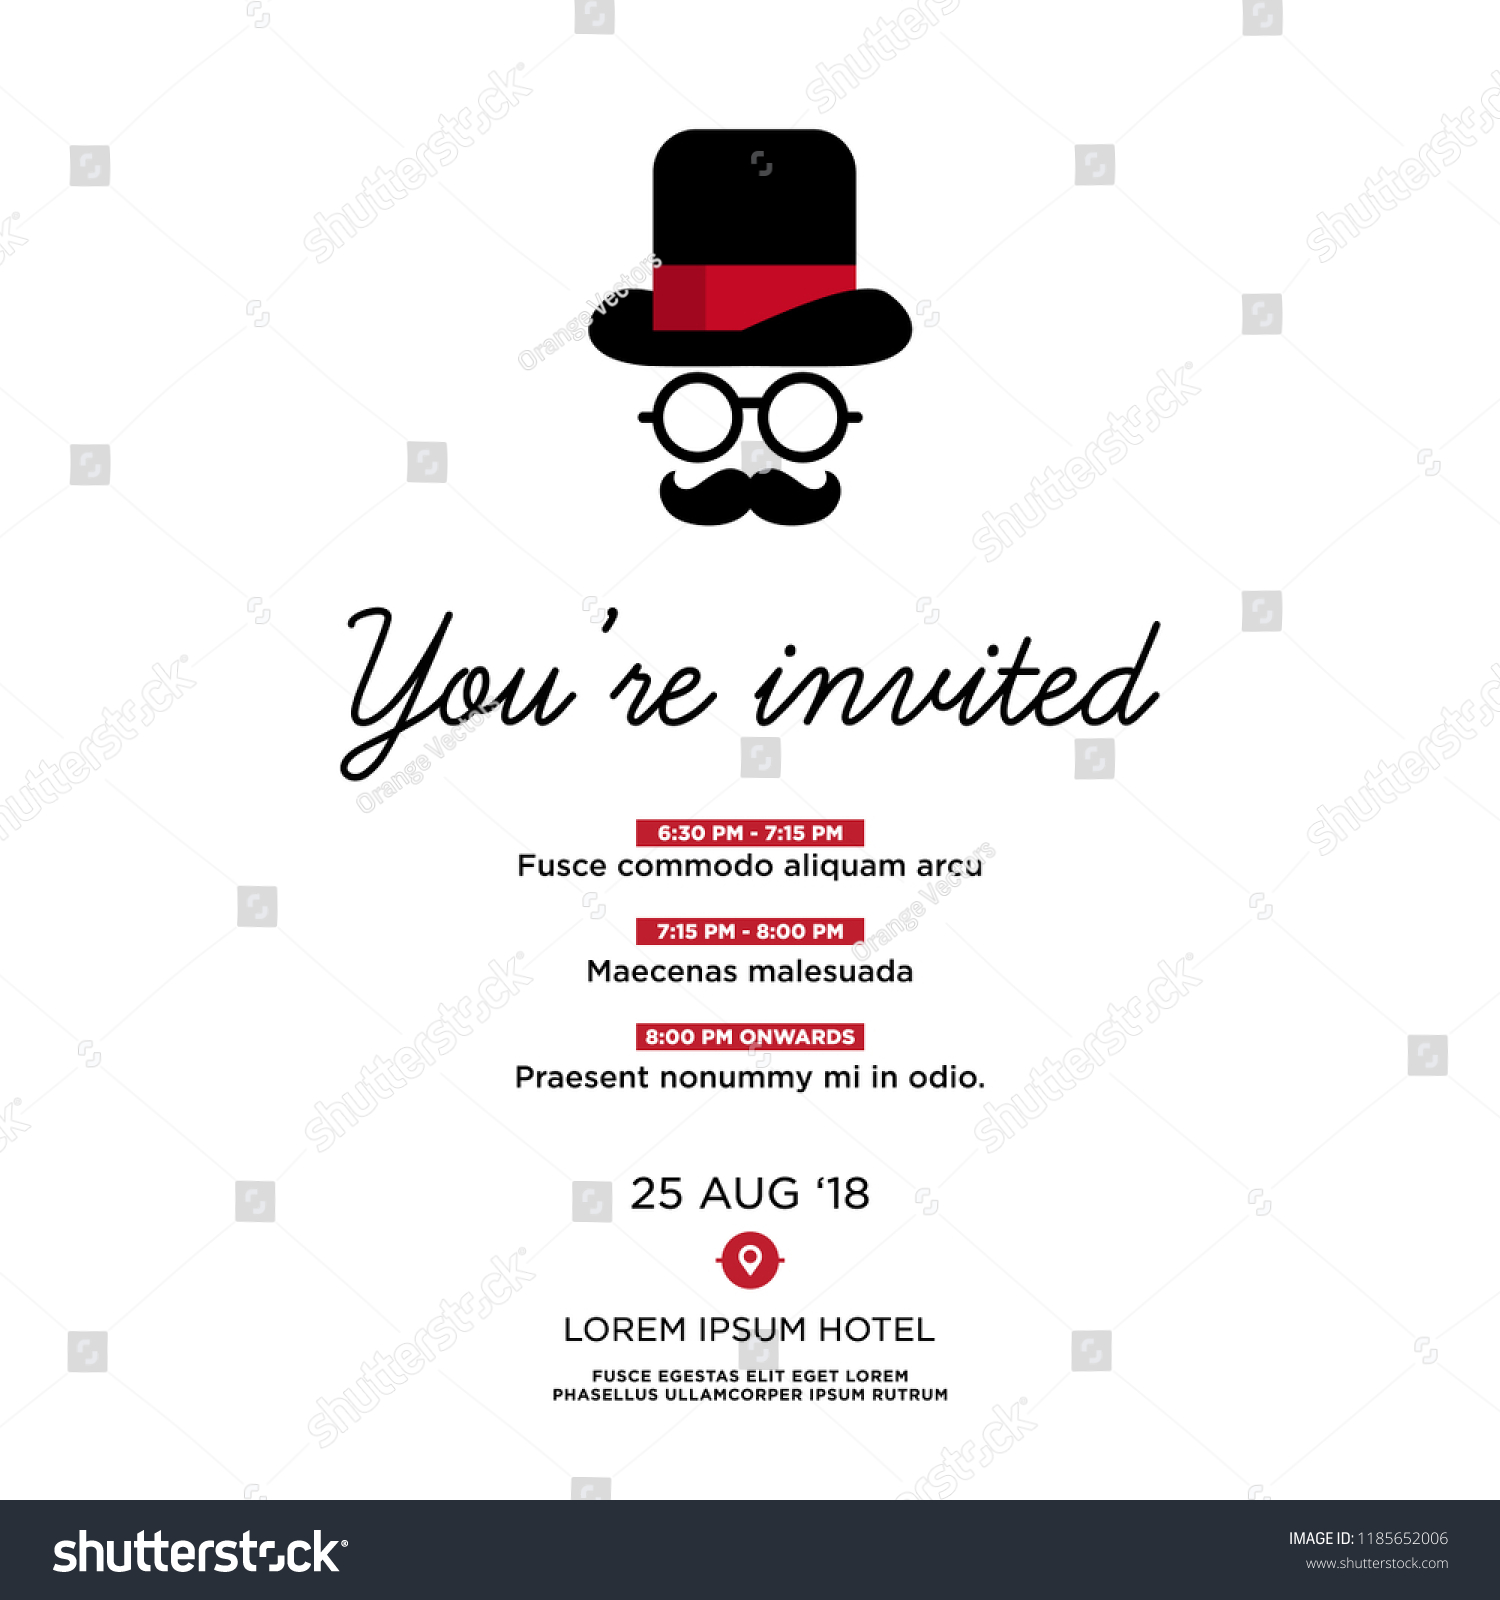 Formal Party Invitation Template from image.shutterstock.com